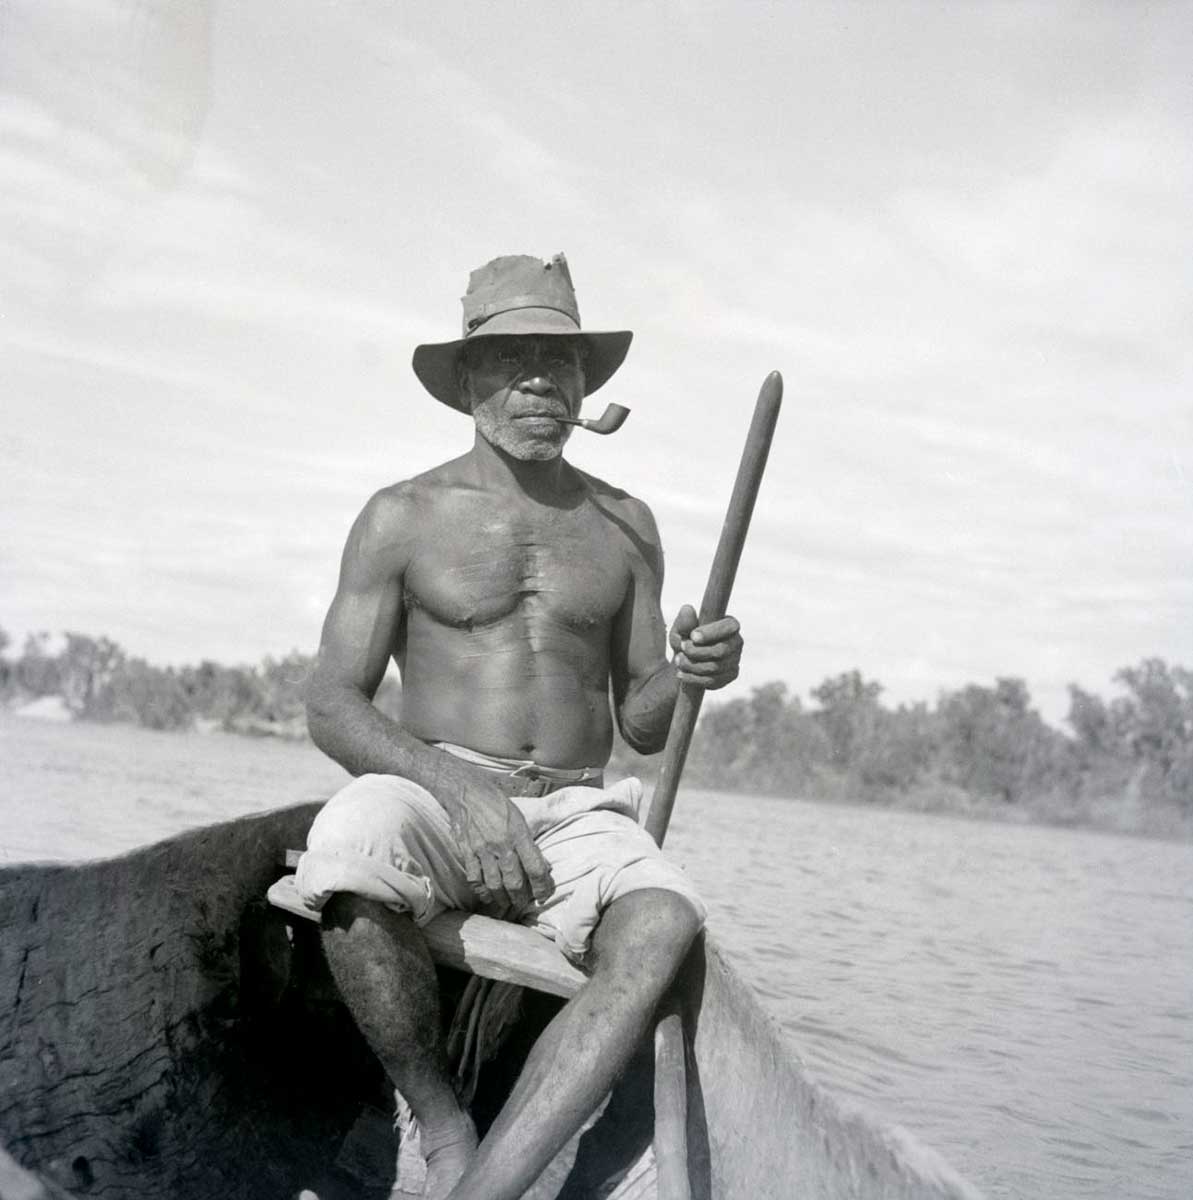 A black and white photographic negative that depicts an Aboriginal man wearing a hat with a pipe in his mouth sitting in a canoe on a river. - click to view larger image